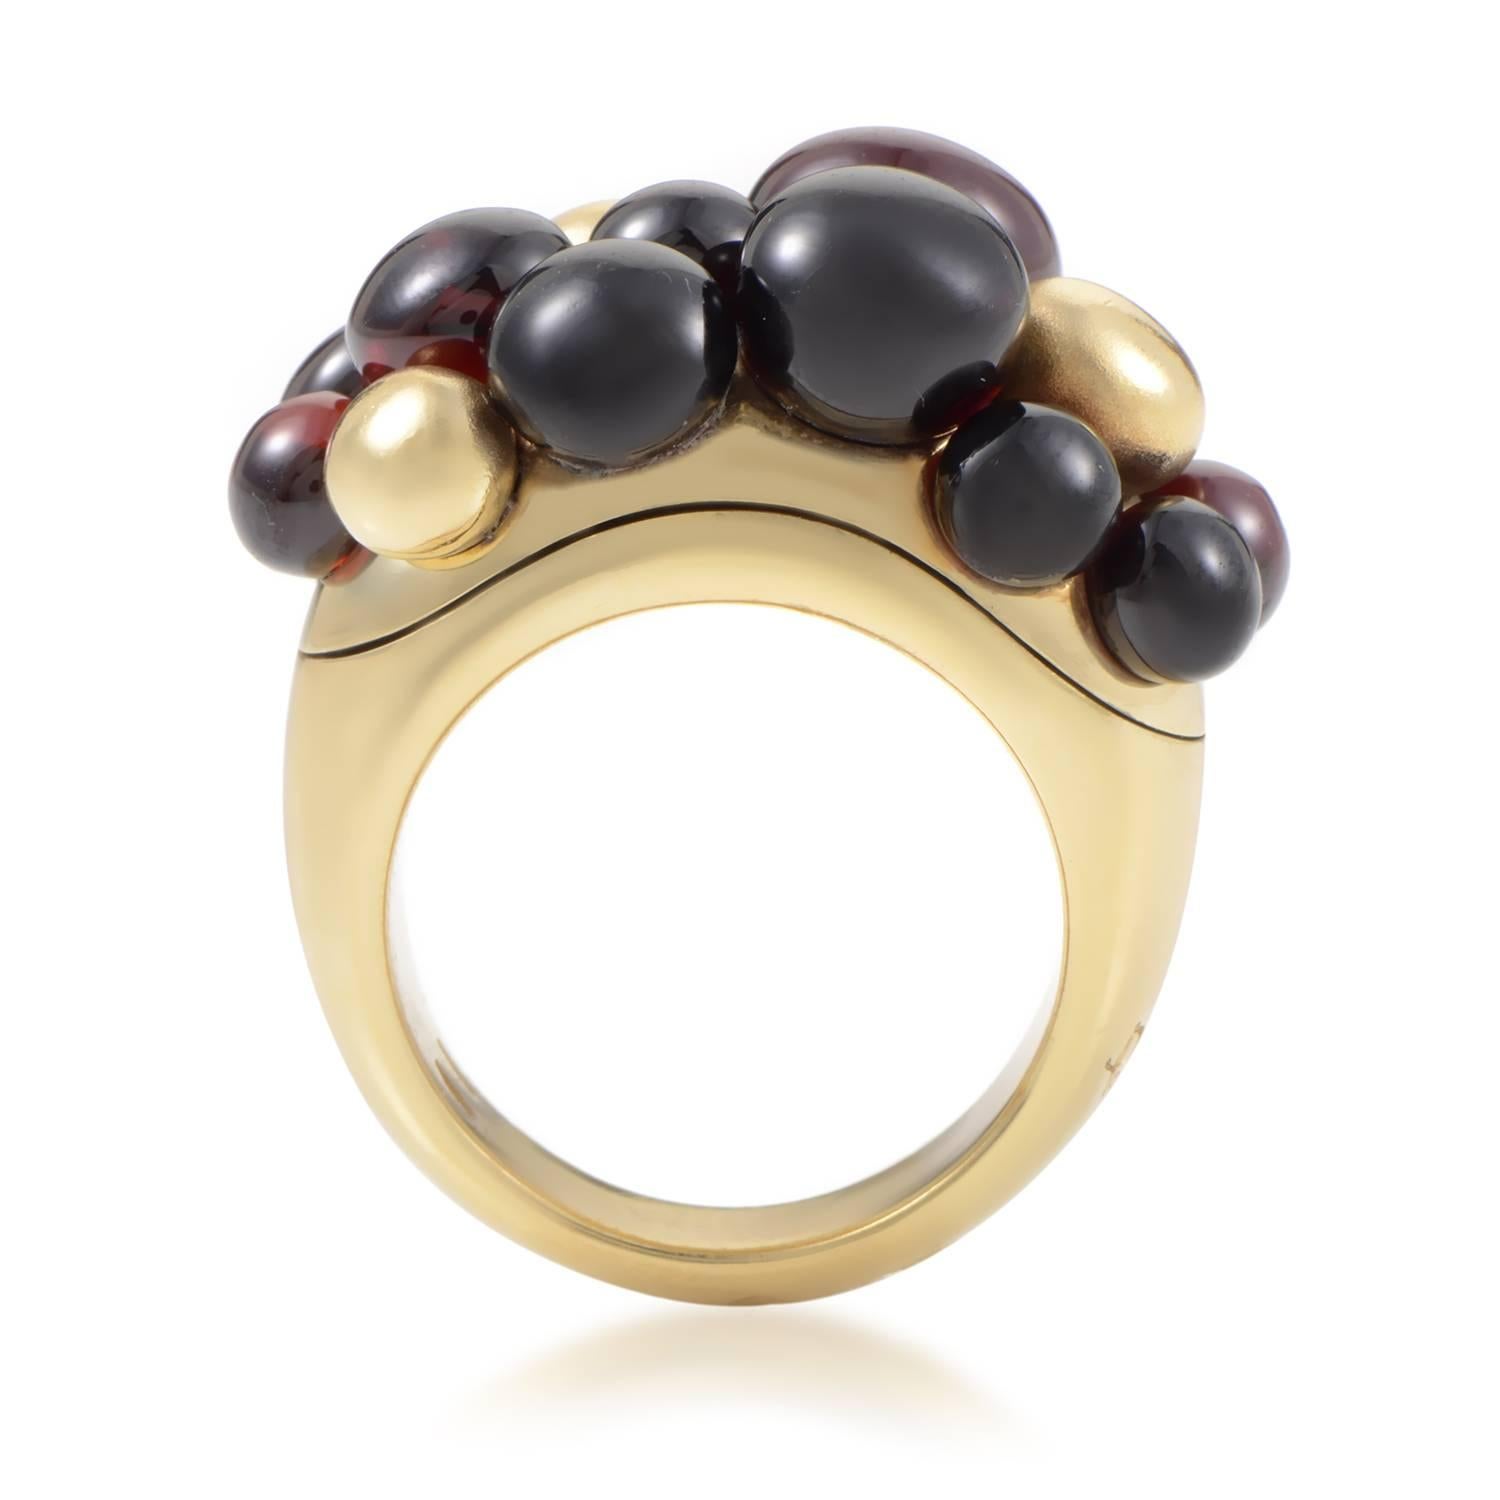 Perfectly complementing the inherent elegance of 18K yellow gold enhanced by its smooth shape and immaculate finish, the marvelous garnet stones grace this astonishing ring from Pomellato with excellent contrast and captivating beauty.
Ring Top